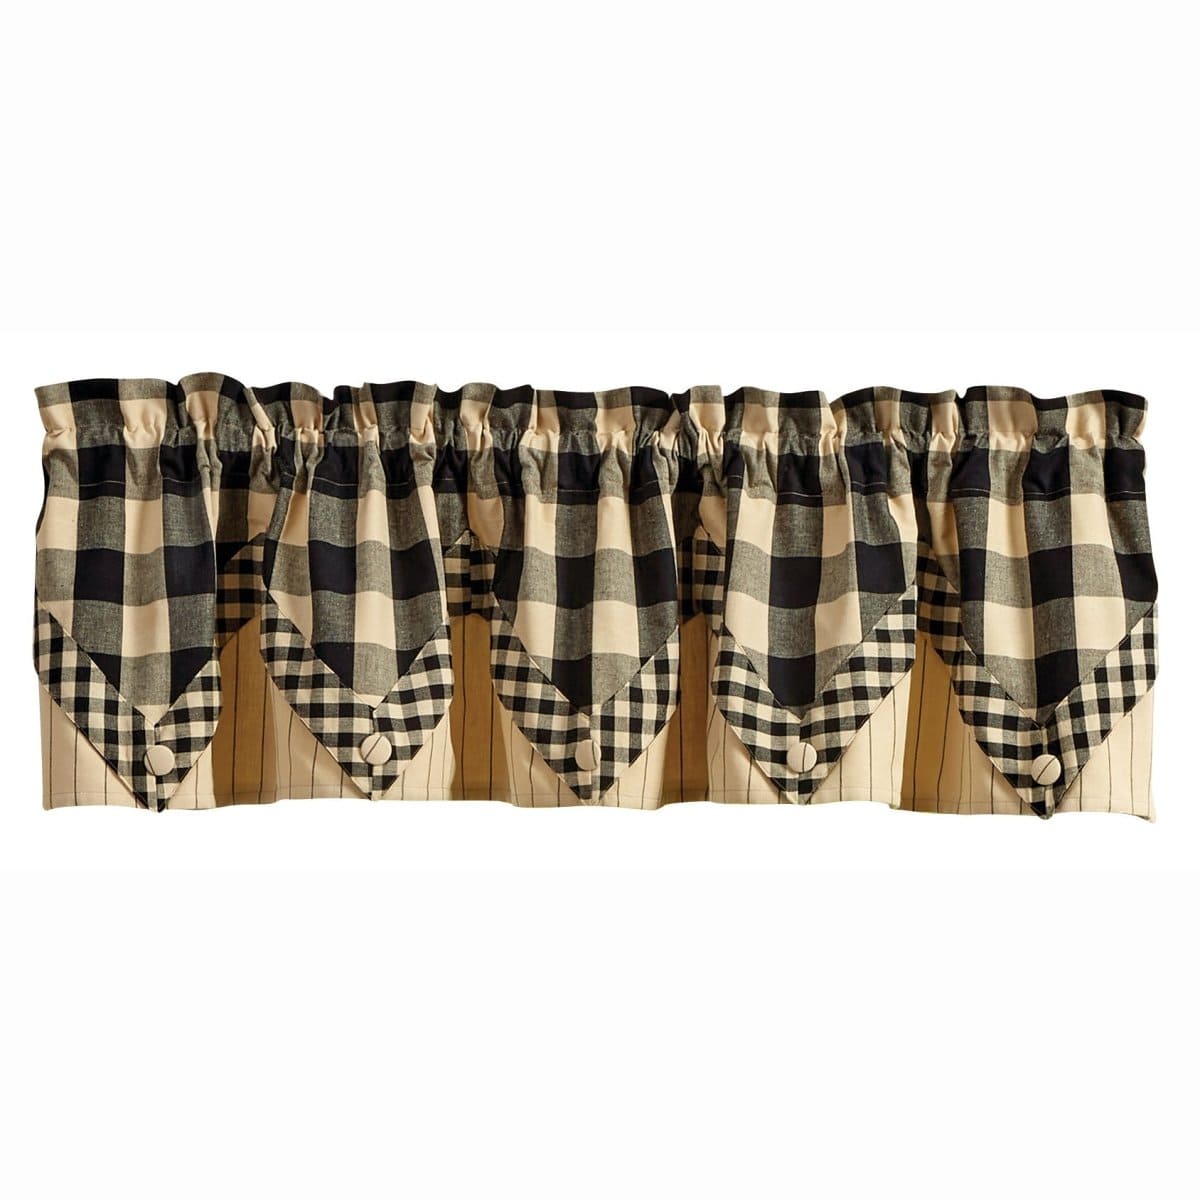 Wicklow Check in Black Point Valance Lined-Park Designs-The Village Merchant